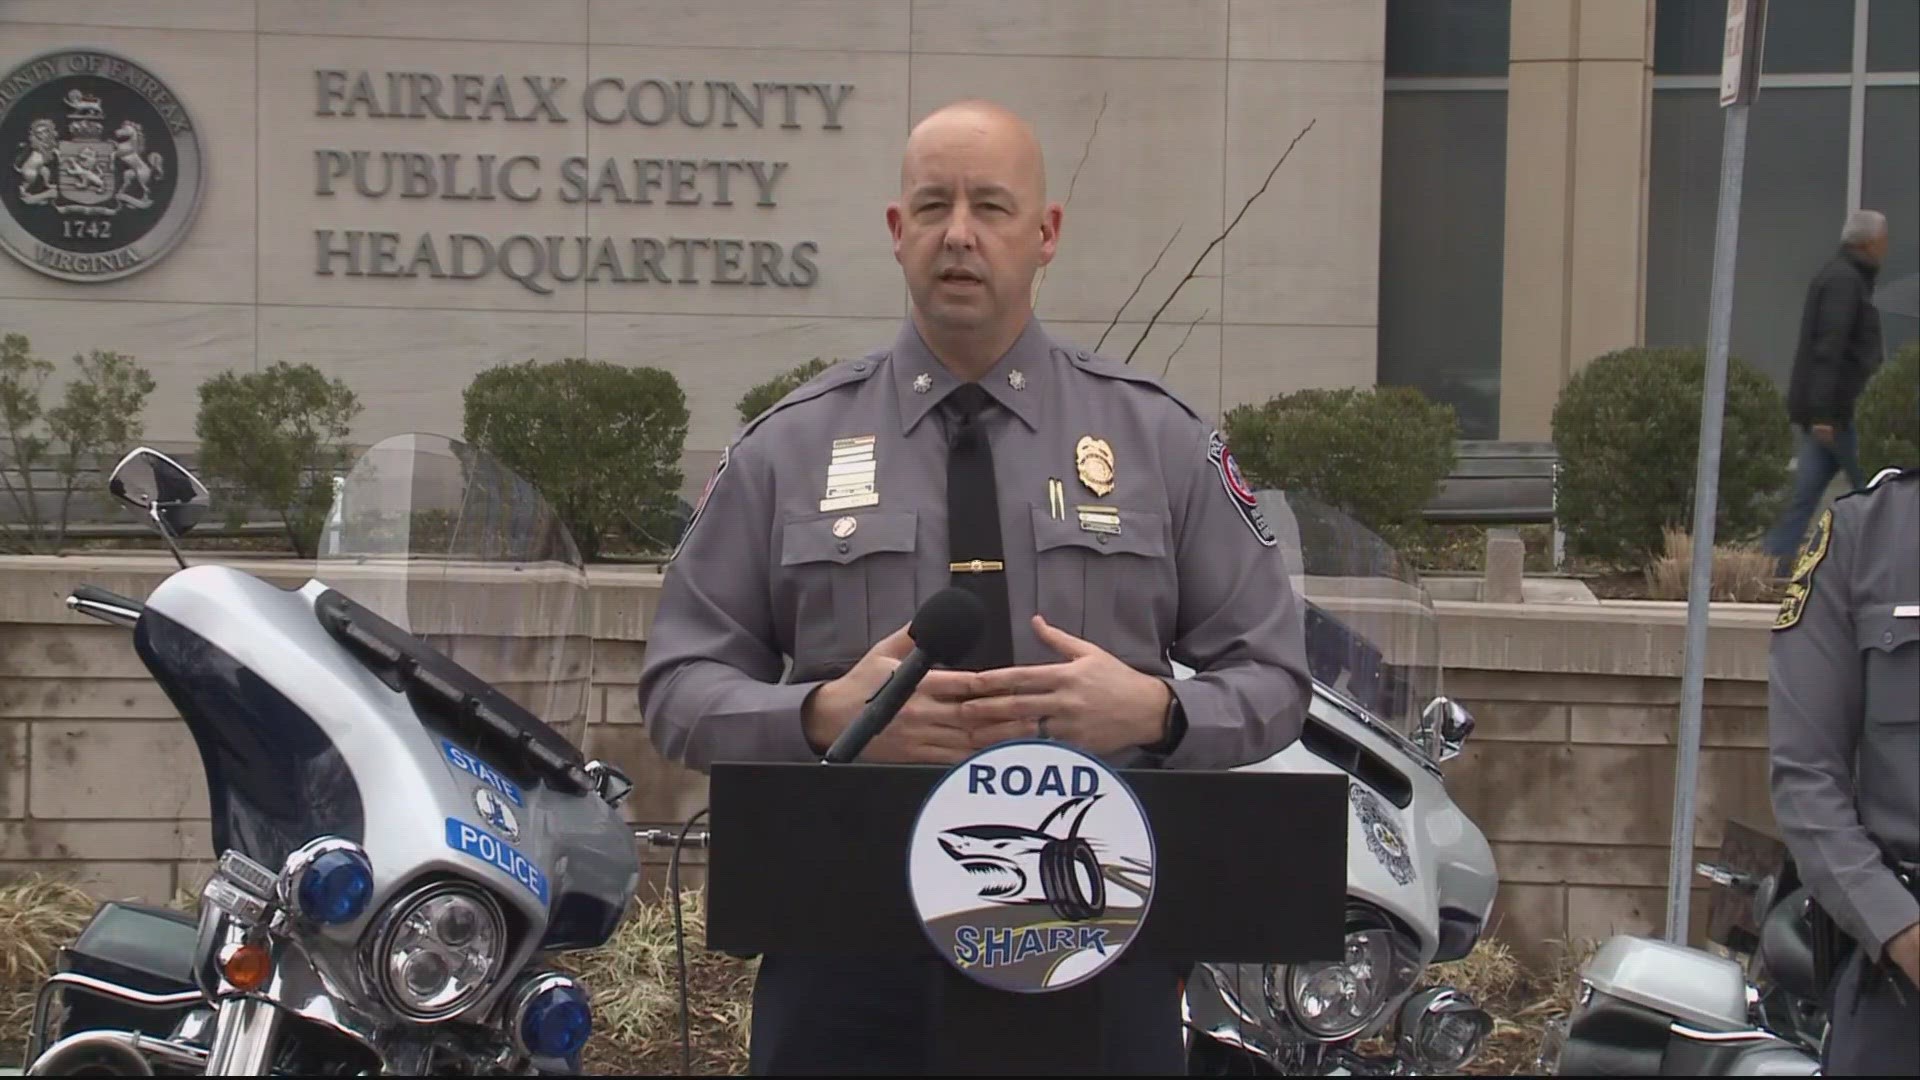 The Fairfax County Police Department and Virginia State Police troopers will utilize "high-visibility enforcement operations" targeting areas with high crash rates.